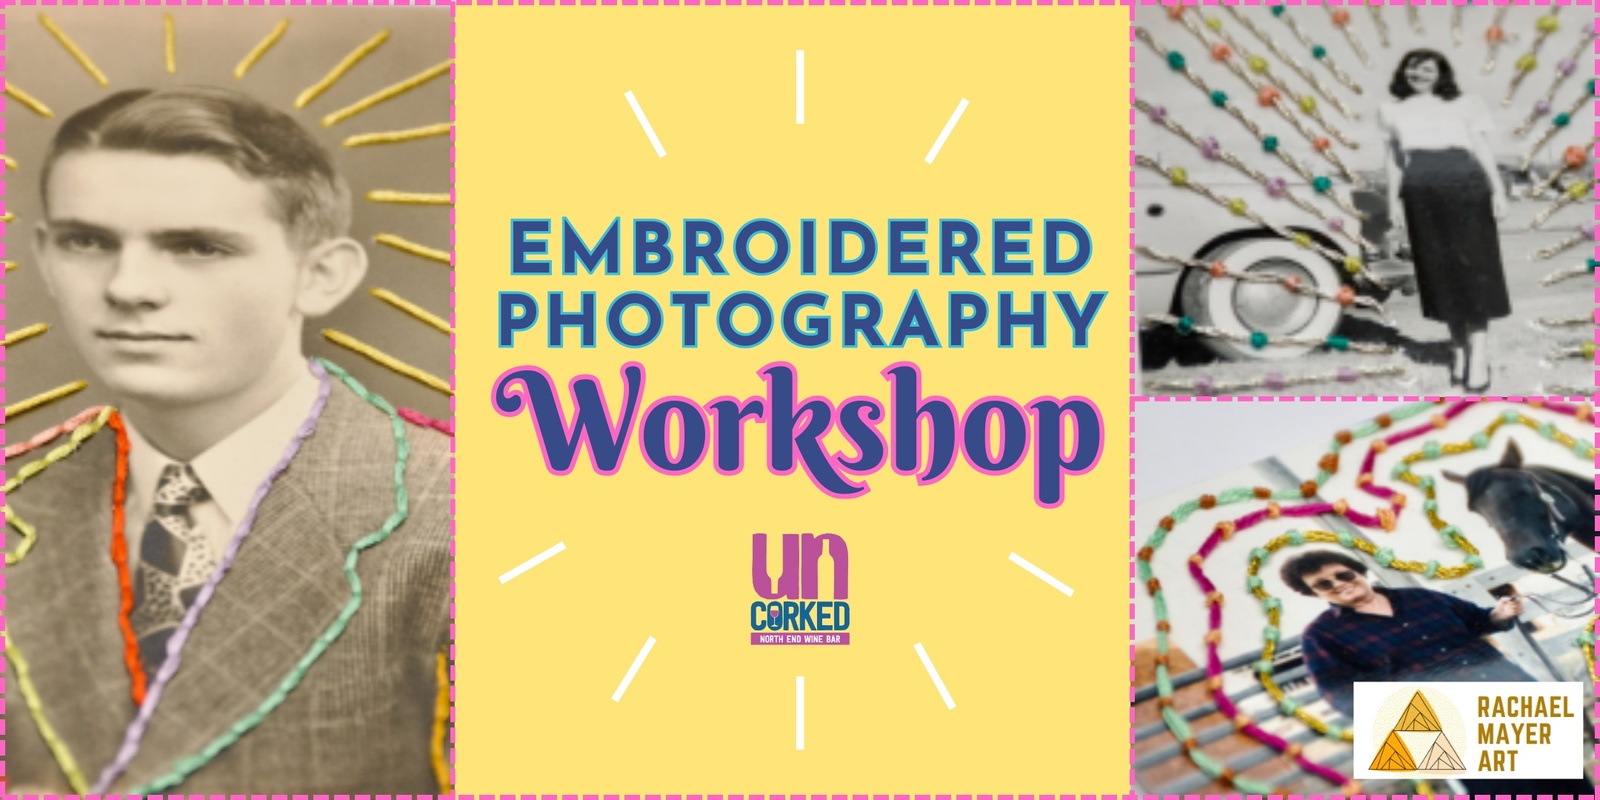 Banner image for Embroidered Photograph Workshop at the UnCorked Wine Bar